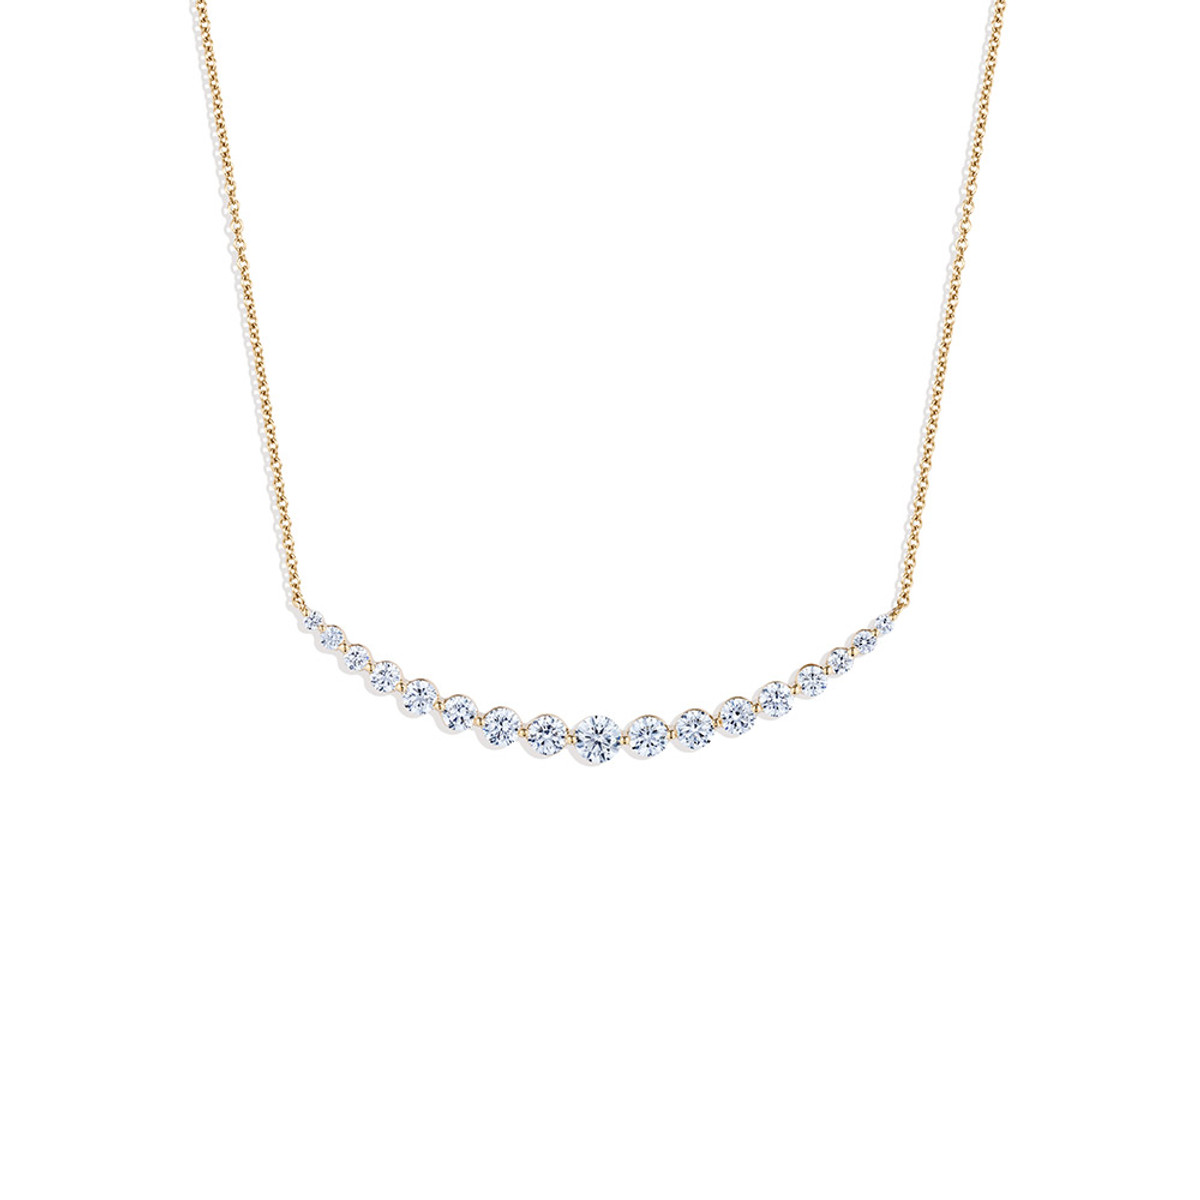 Hyde Park Collection 18K Yellow Gold Diamond Bar Necklace-37473